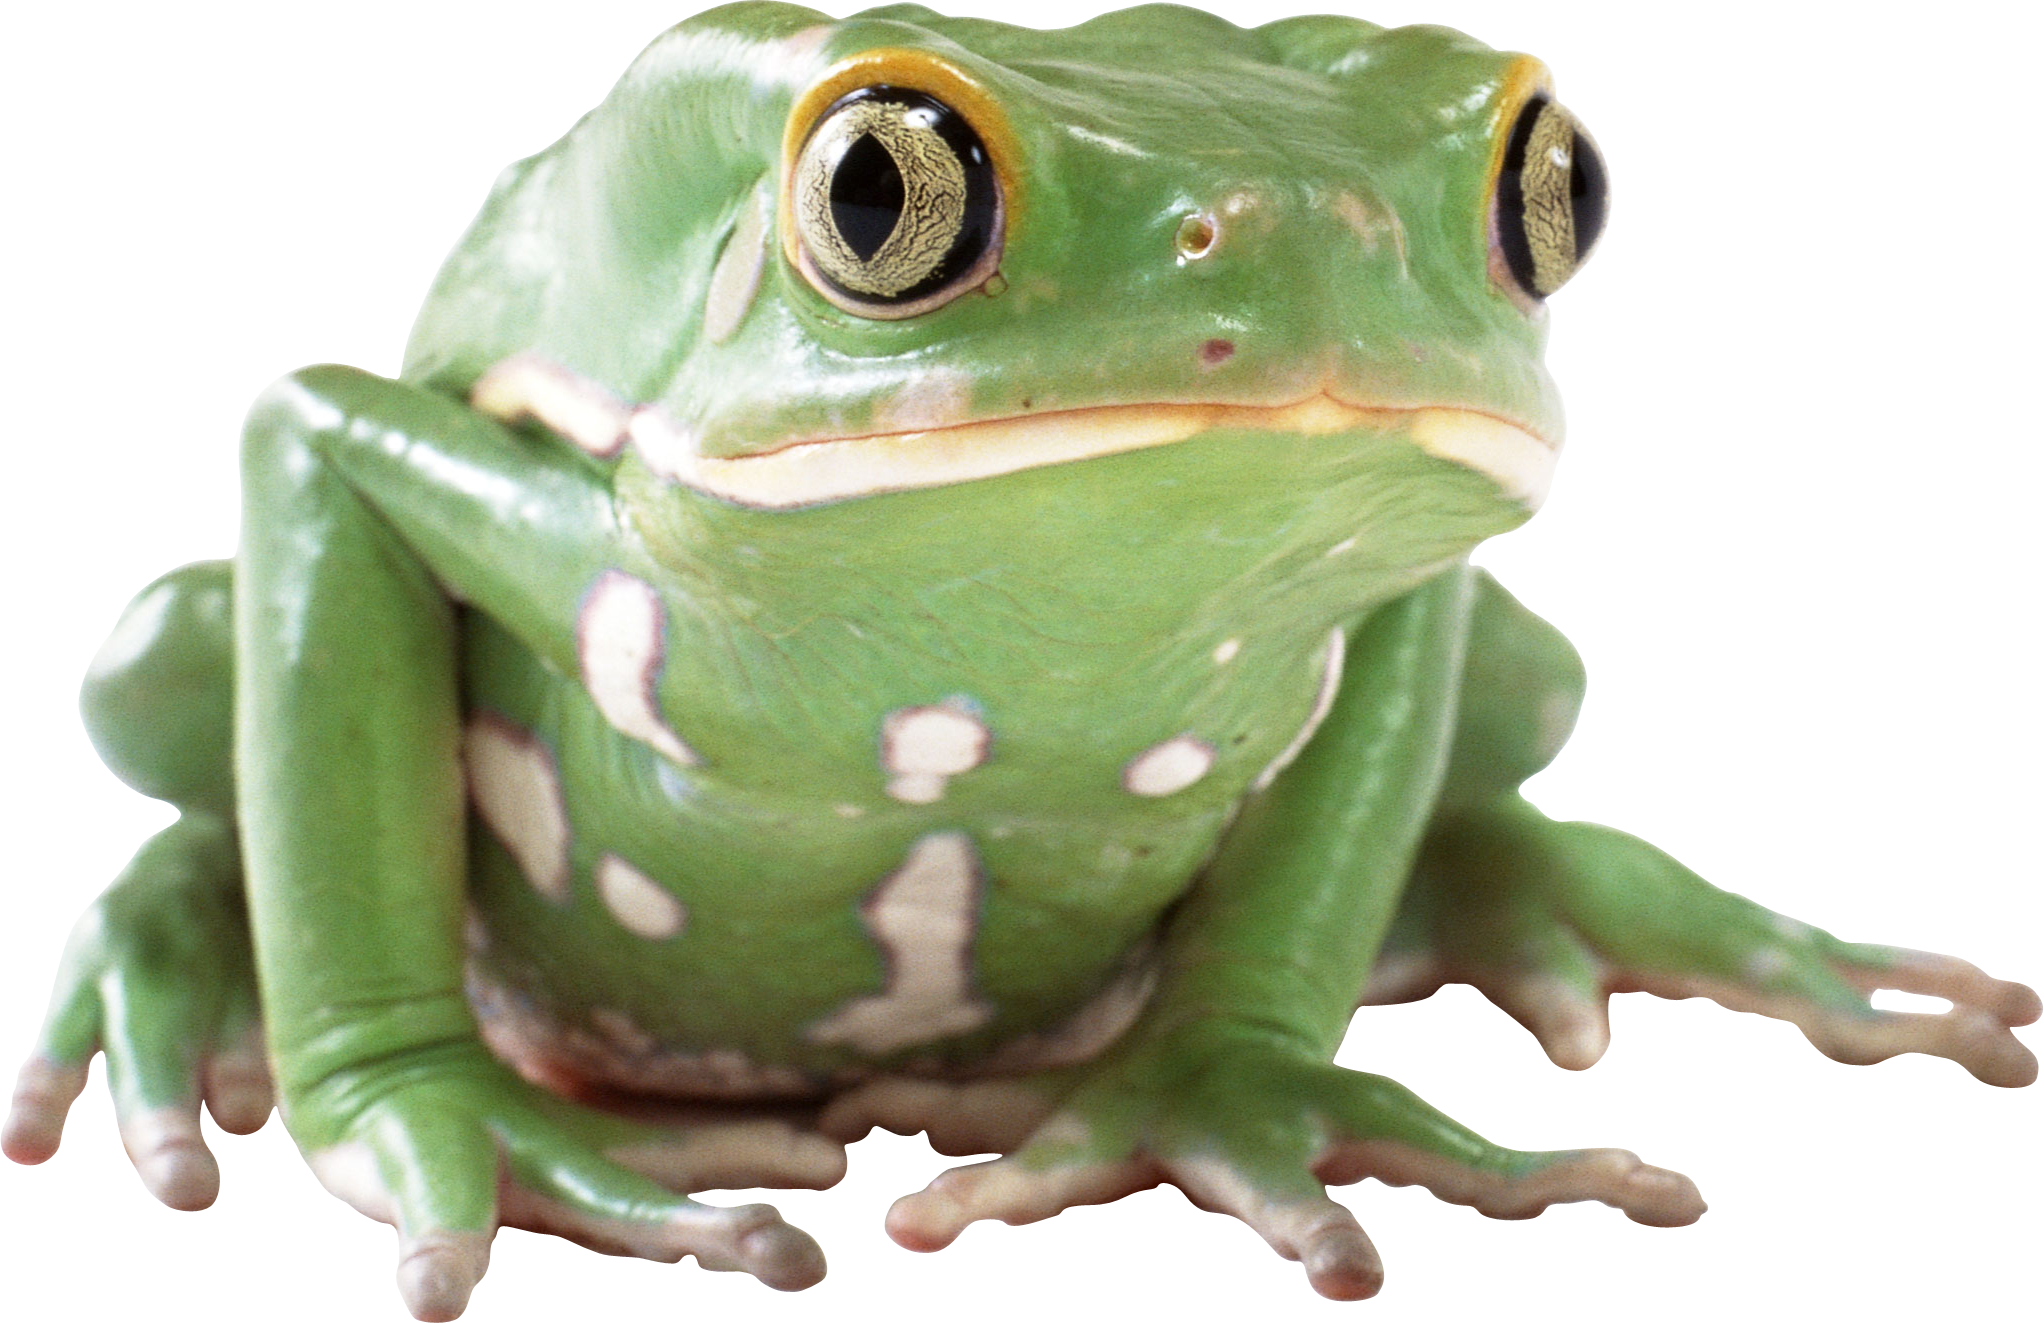 Picture Amphibian Frog PNG Image High Quality PNG Image